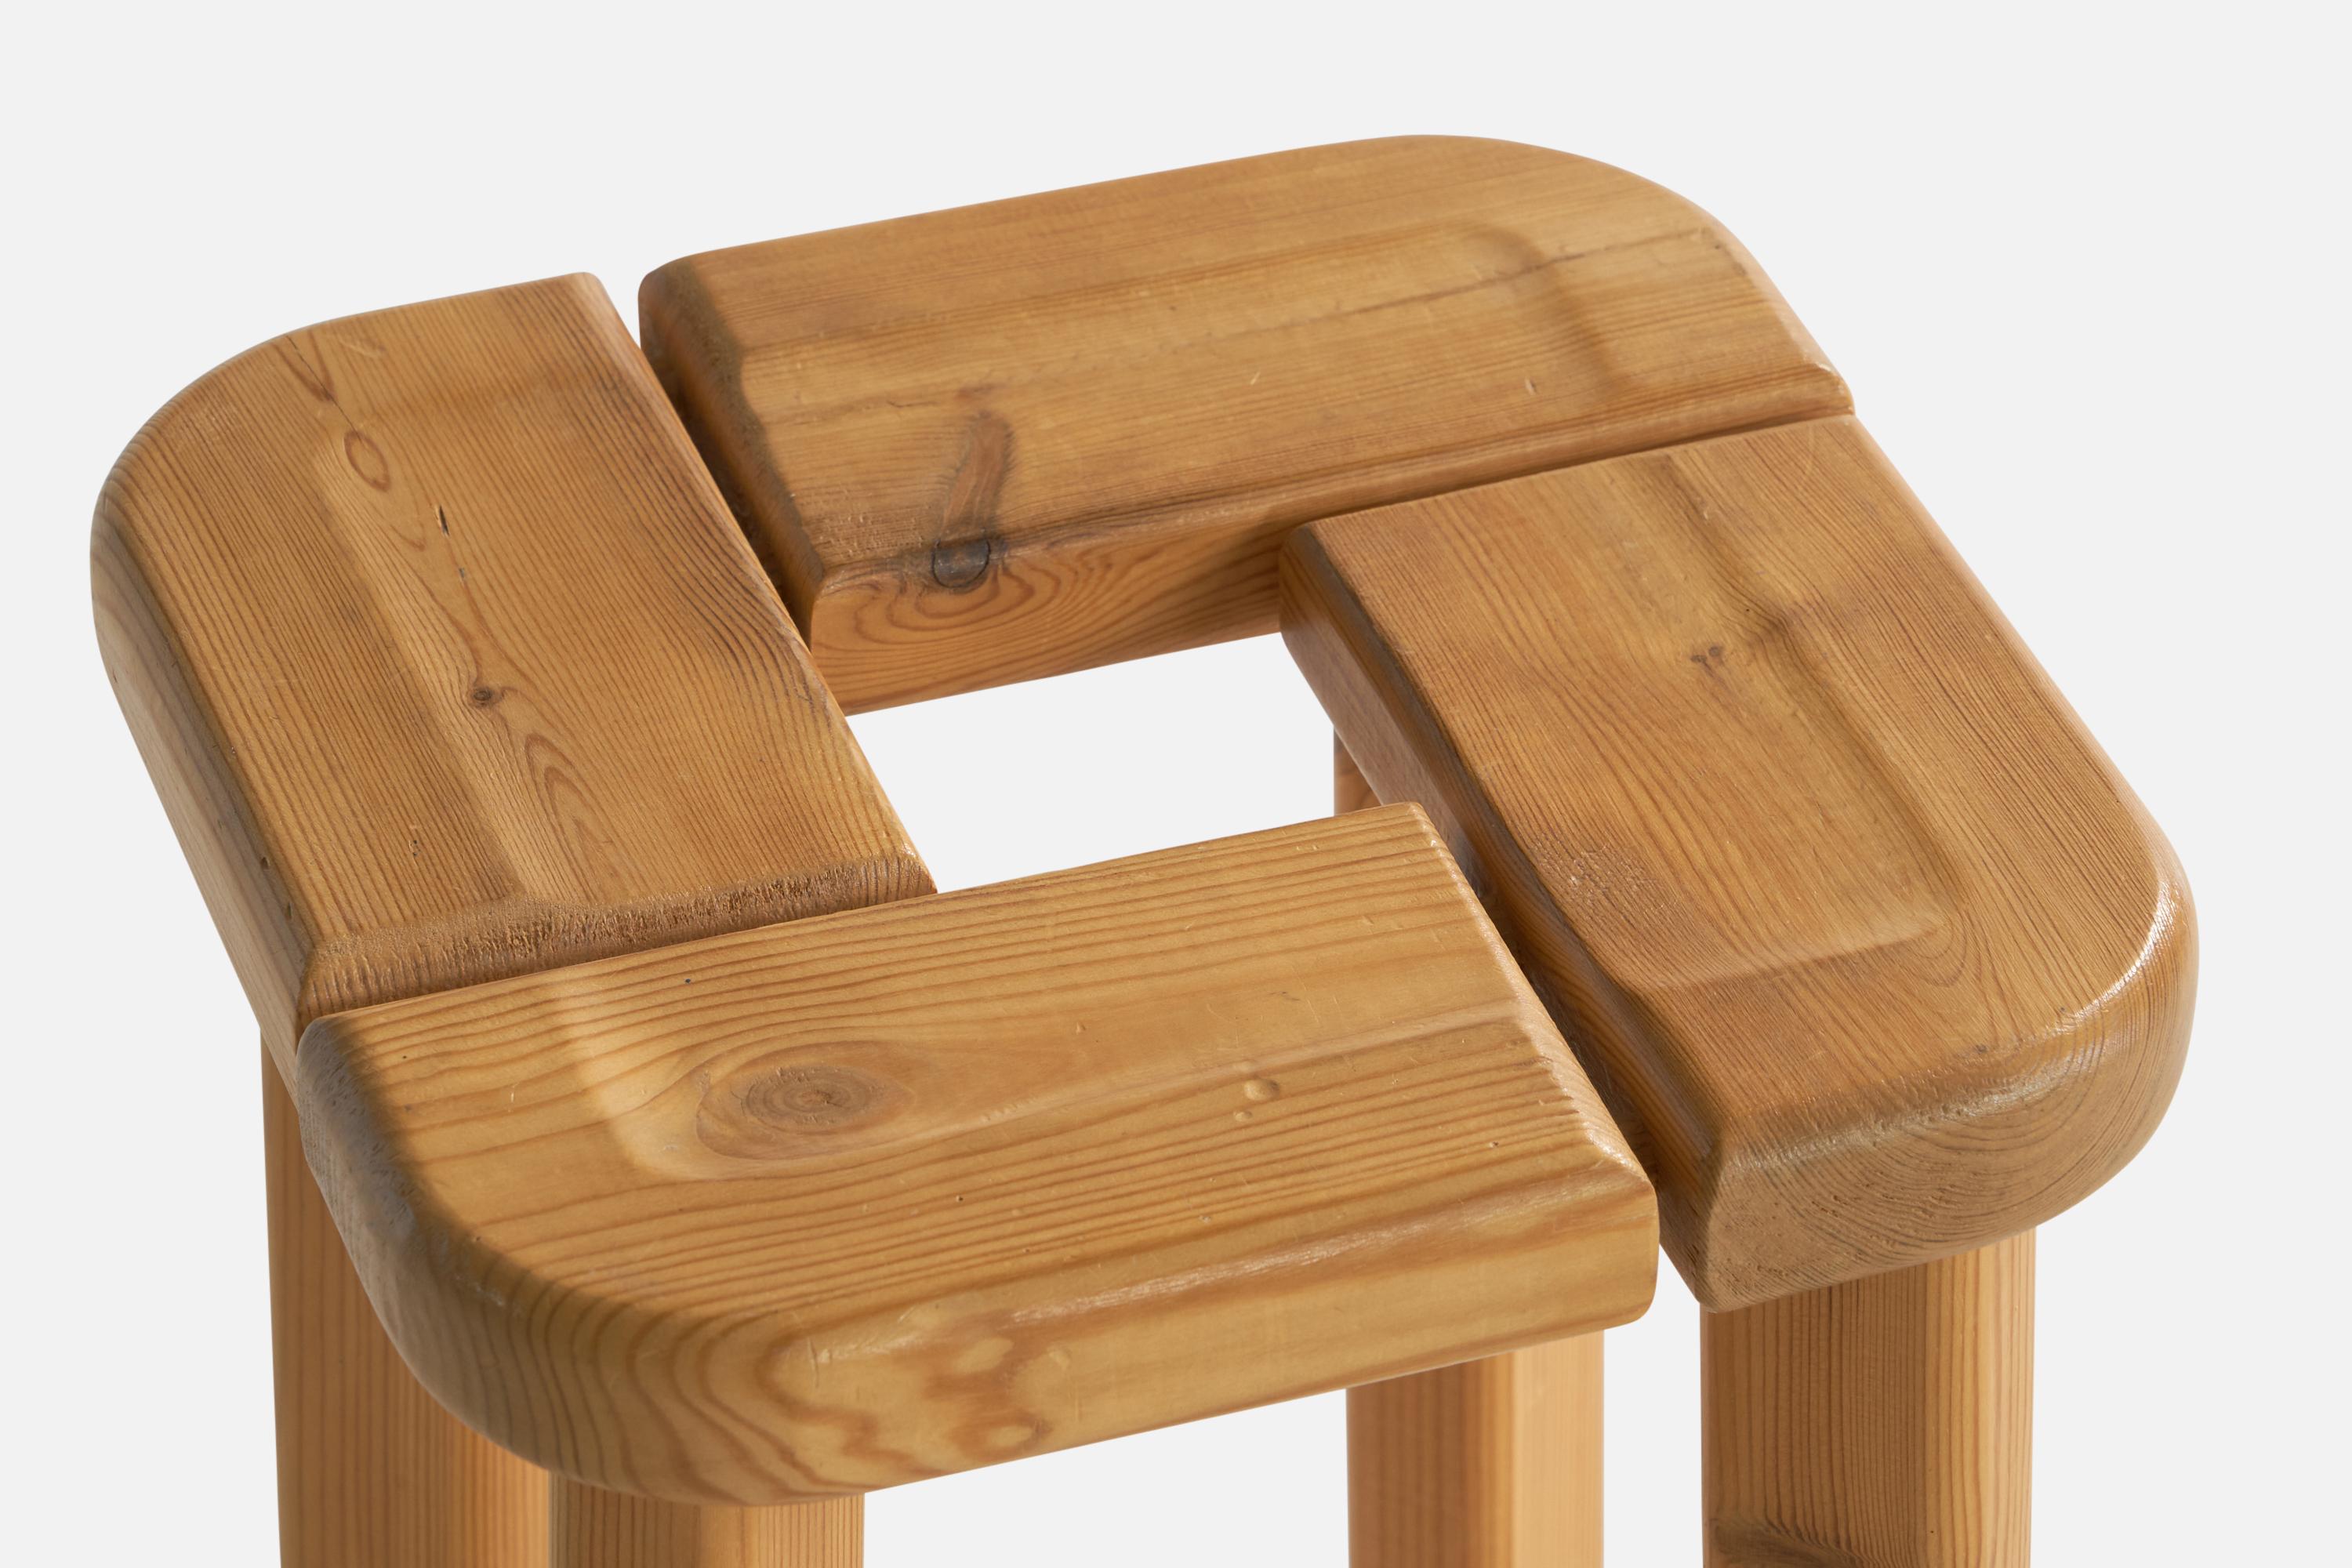 A pine stool designed and produced in Finland, 1970s.

Seat height: 15.8”